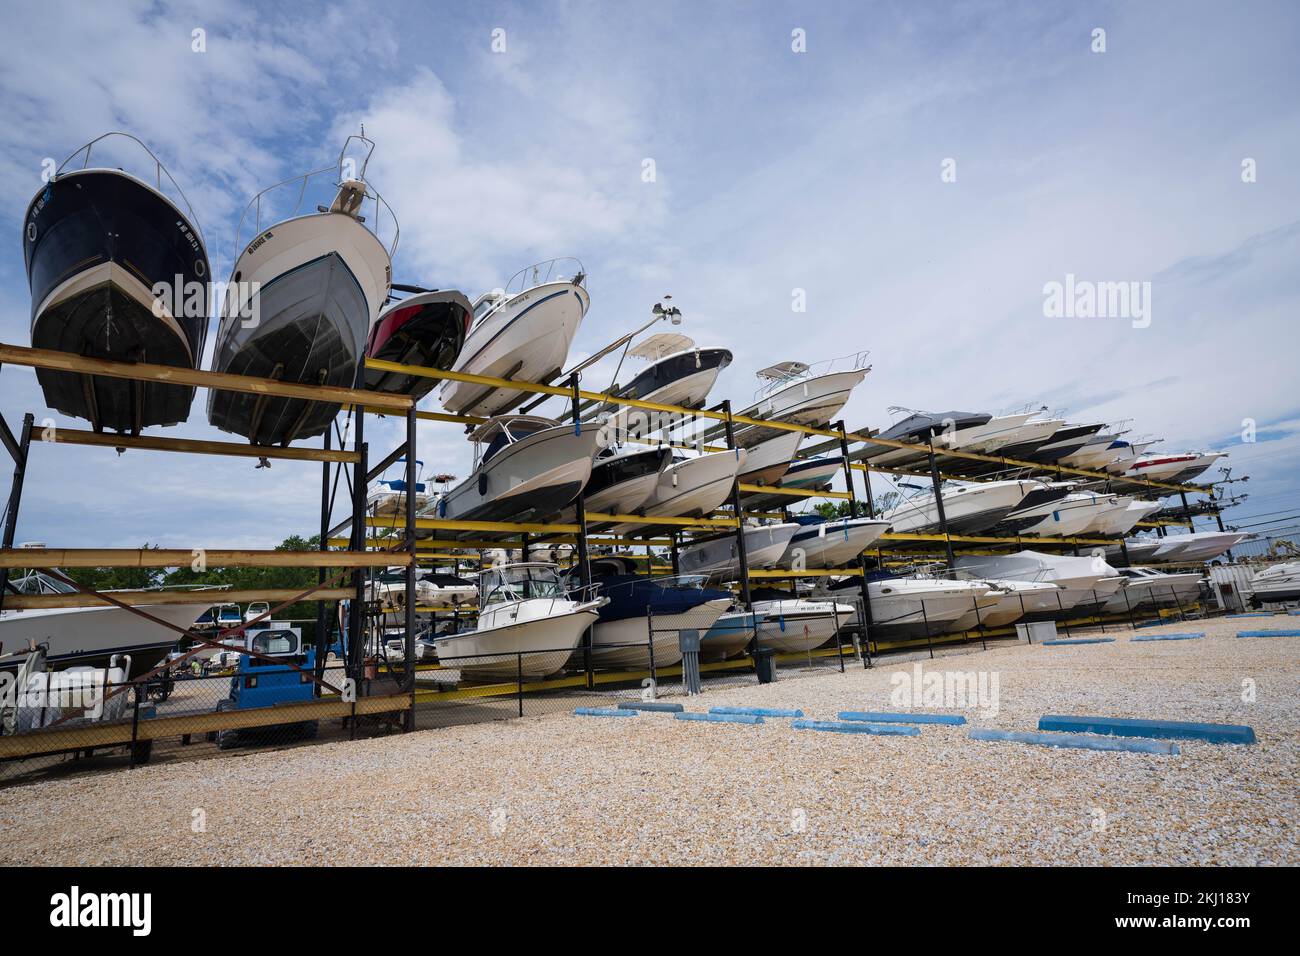 Lots of boats in the outdoor storage under a cloudy sky Stock Photo